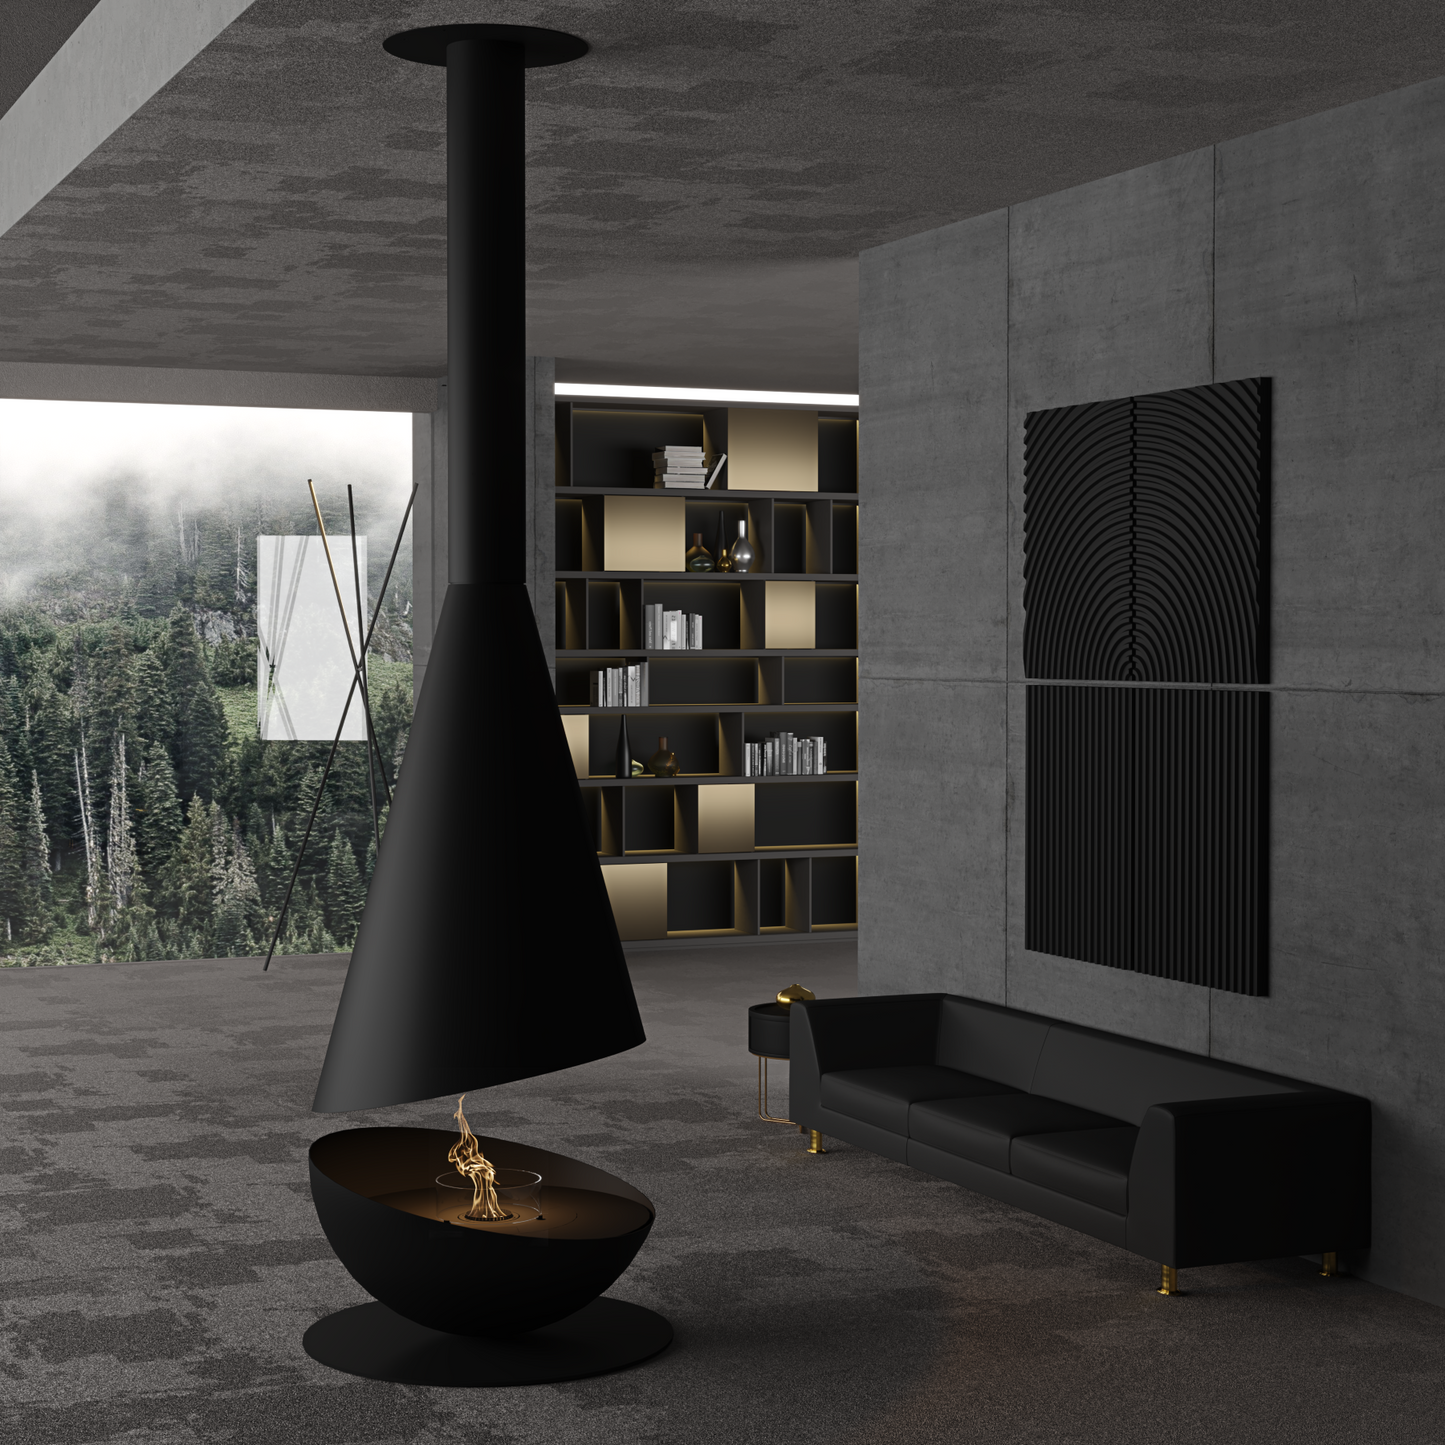 THALES Black in modern living room with library and black leather sofa. Wide windows in the background with view on the forest.